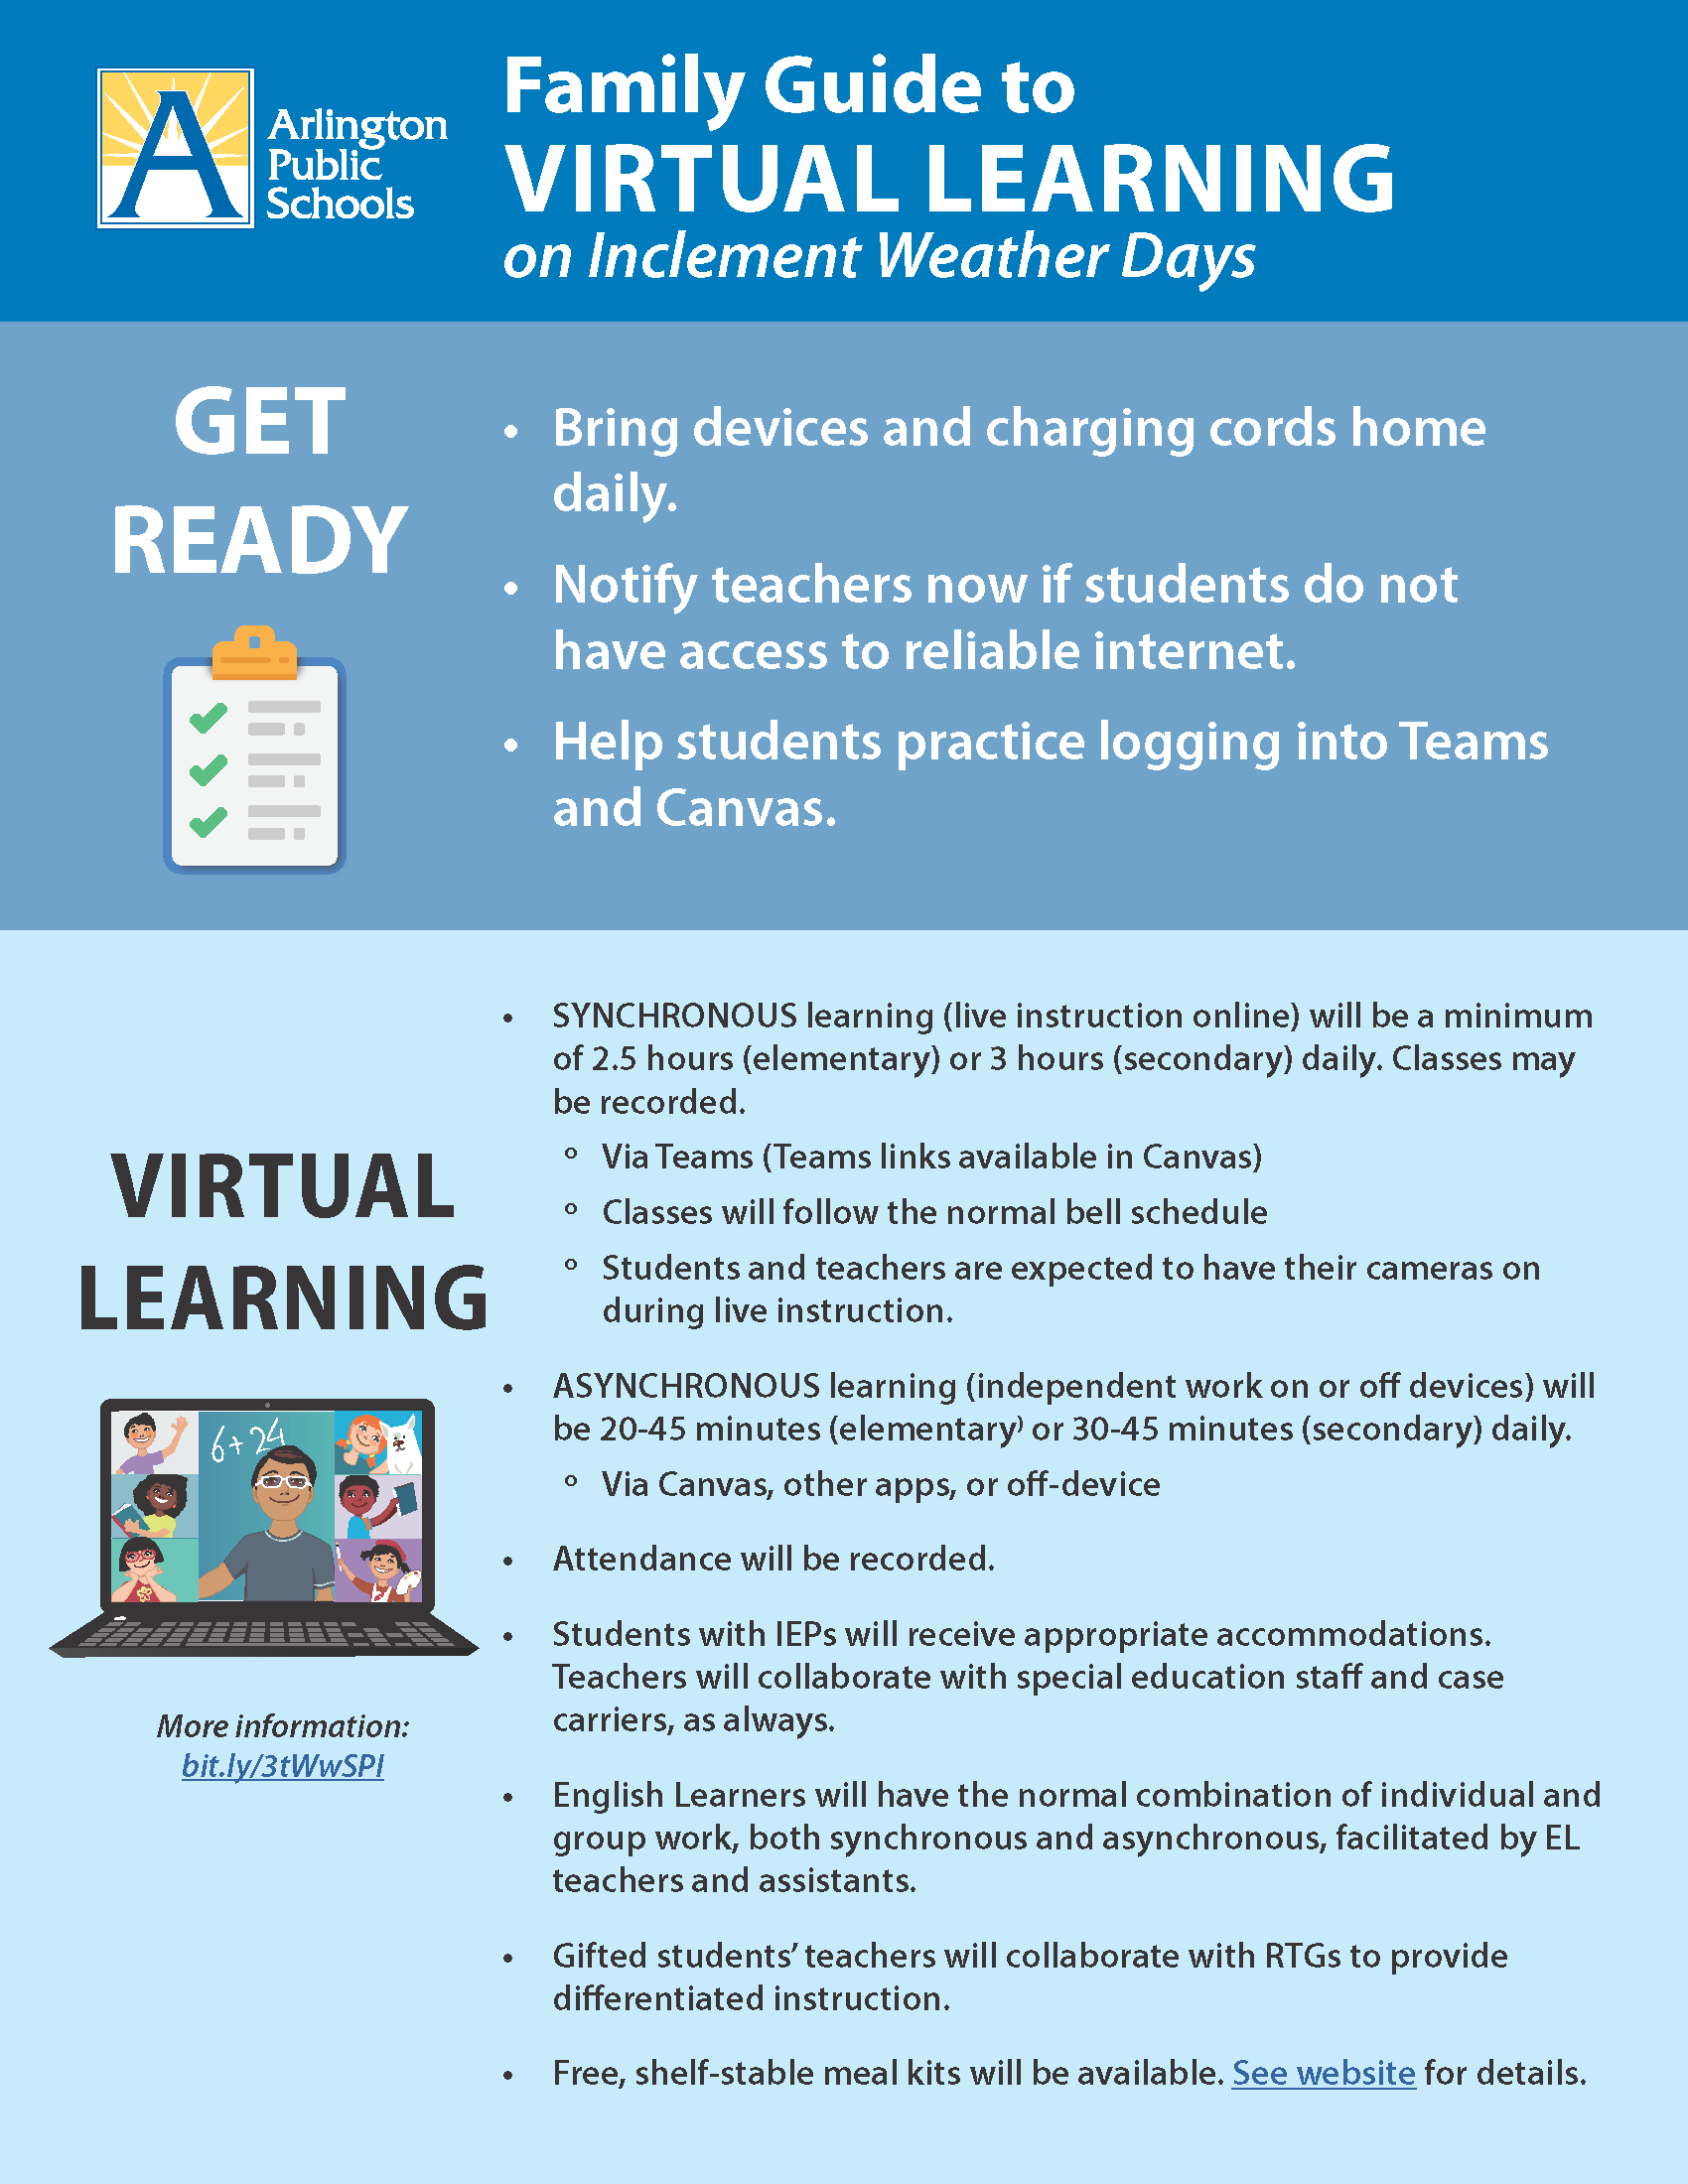 Family guide to virtual learning on inclement weather days - click to load PDF